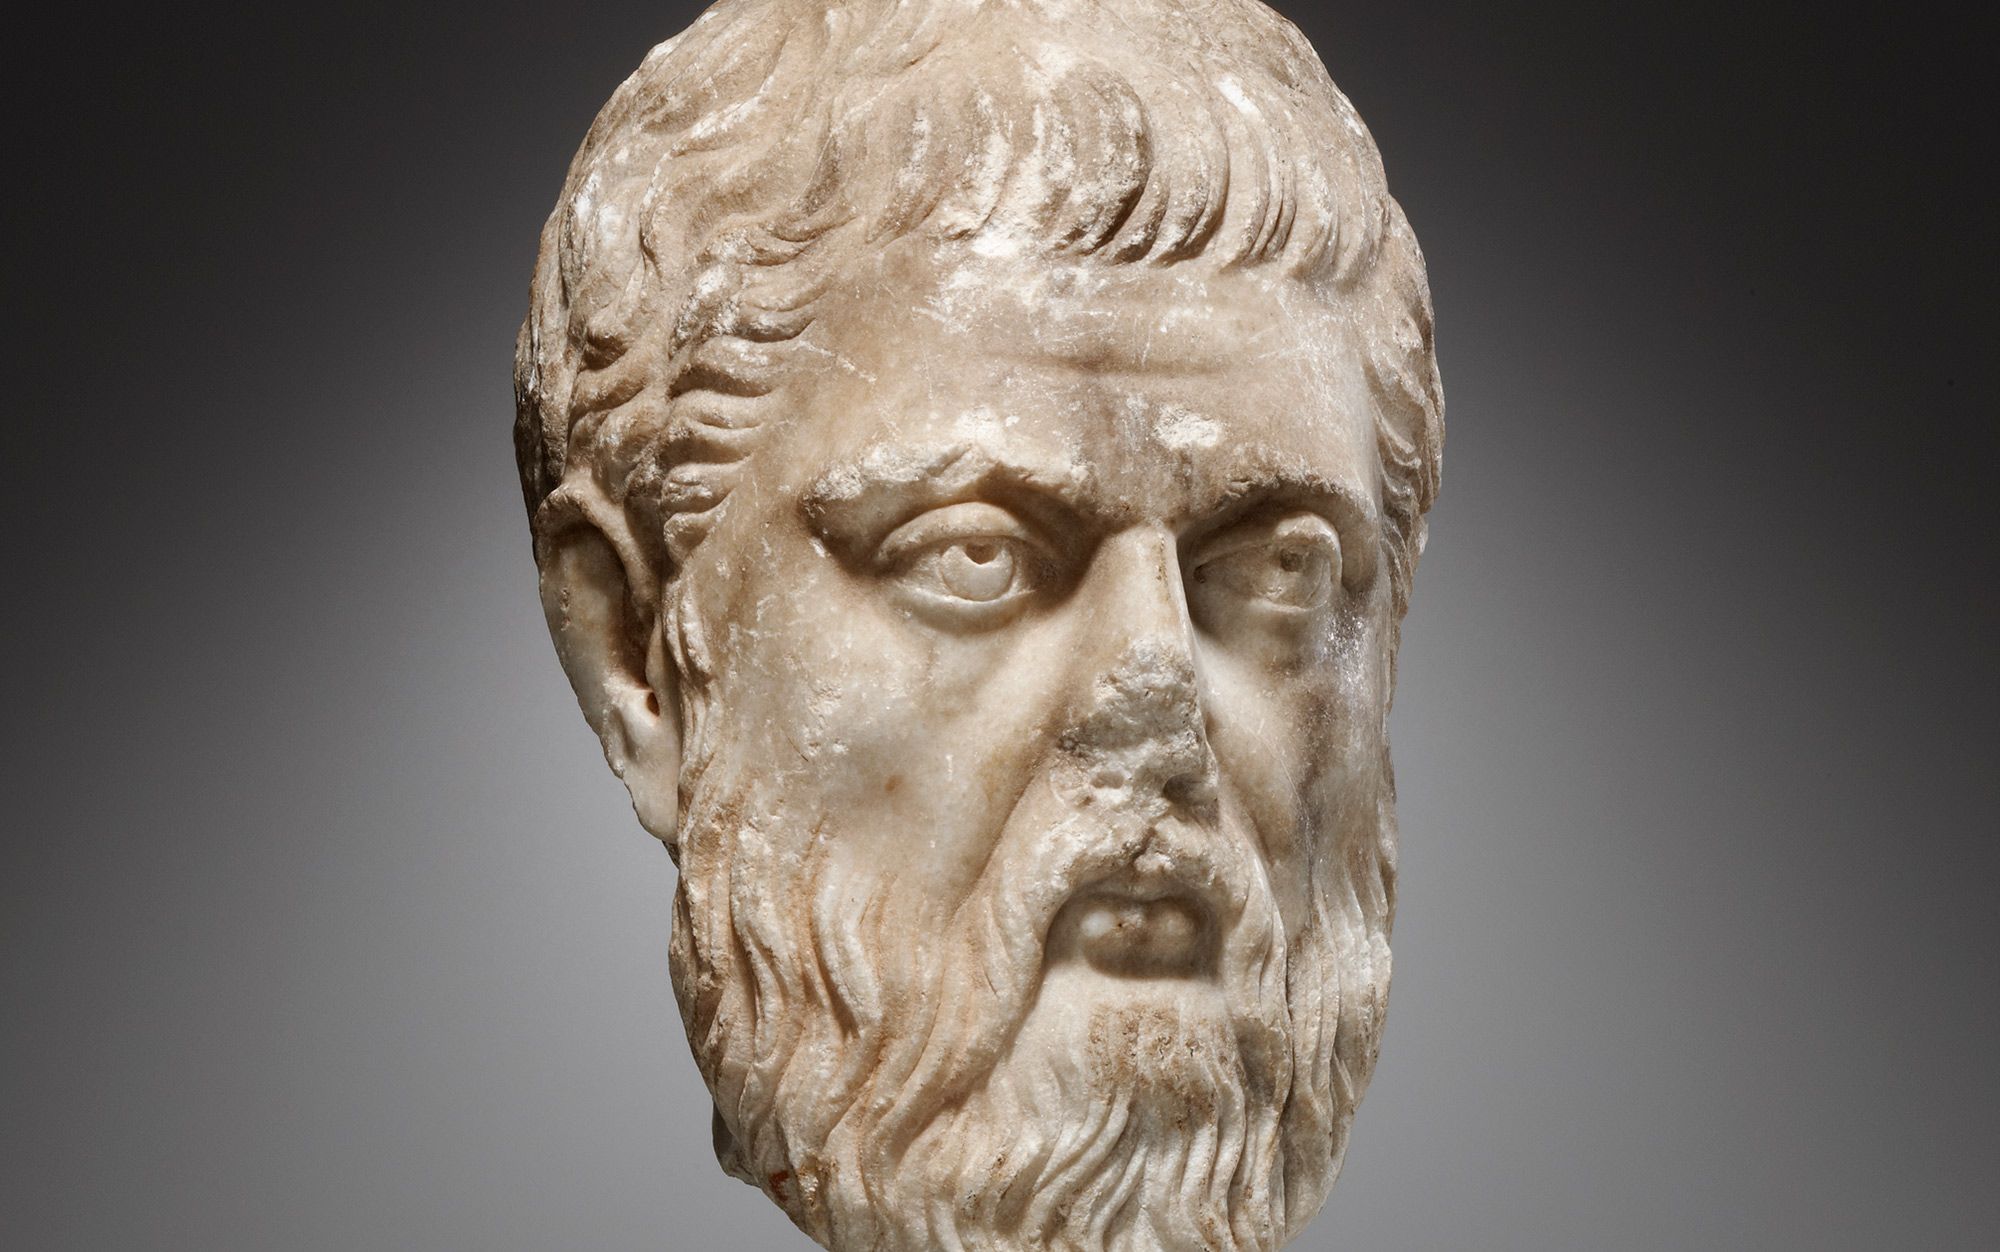 Plato: Books, Life, and Philosophy